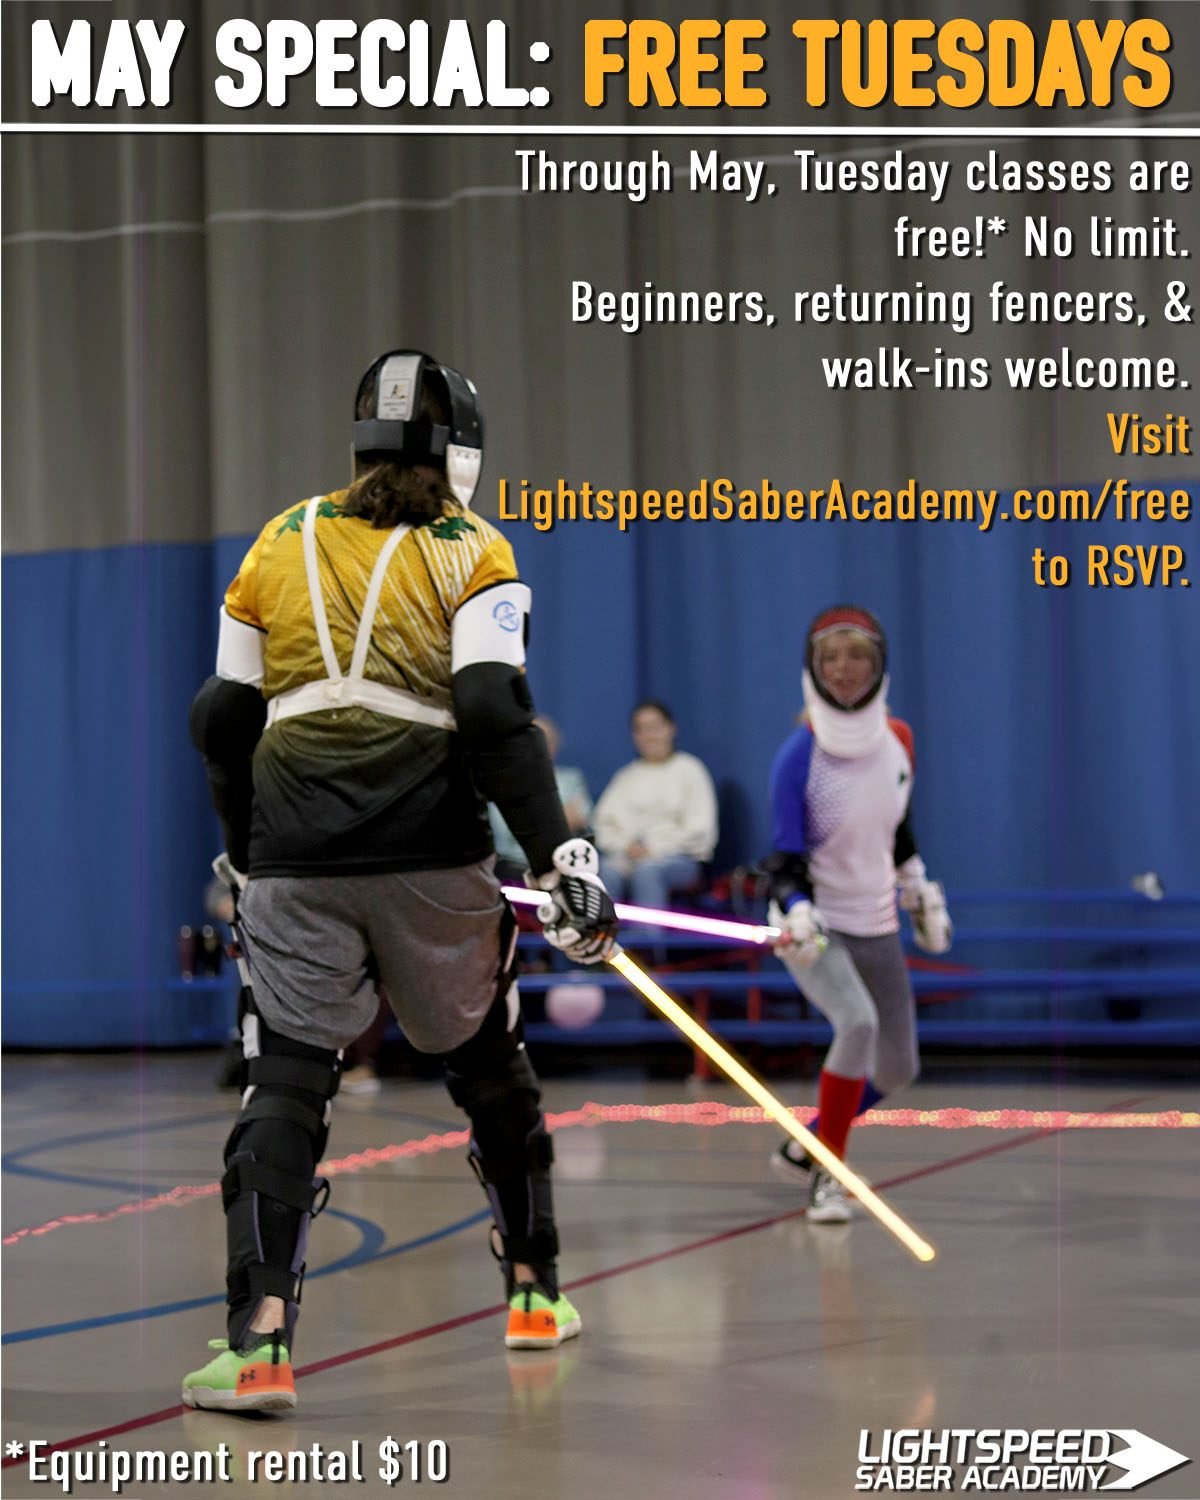 Come try the amazing new sport of Lightspeed Saber fencing! Our latest promotion lets you get in on the action all month long for free, Tuesdays at 7 PM. Get fit, get hit, hit back!

Our classes run for about one hour, with about an hour of optional 